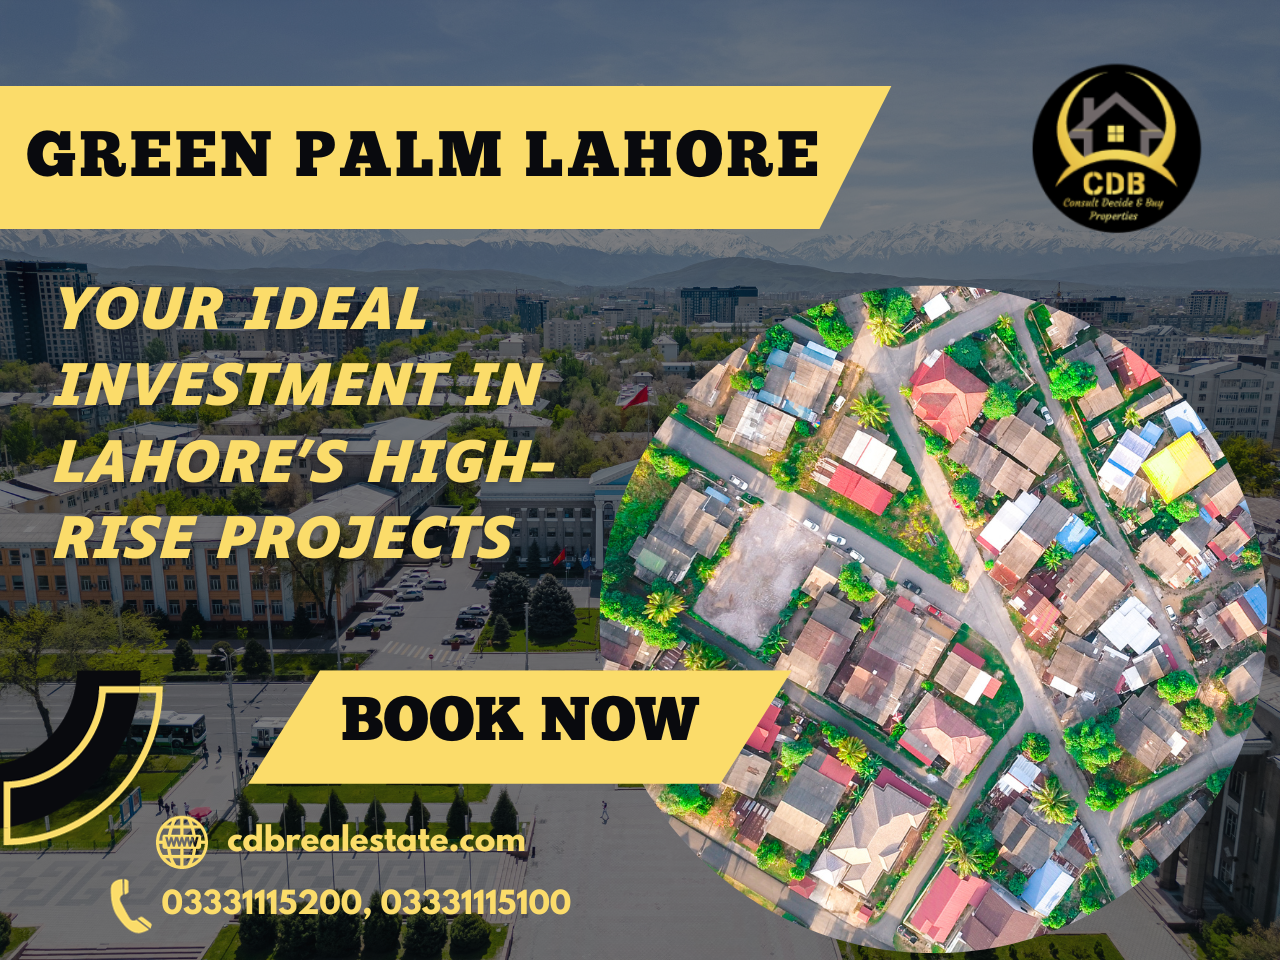 Green Palm Lahore - Your Ideal Investment in Lahore's High-Rise Projects